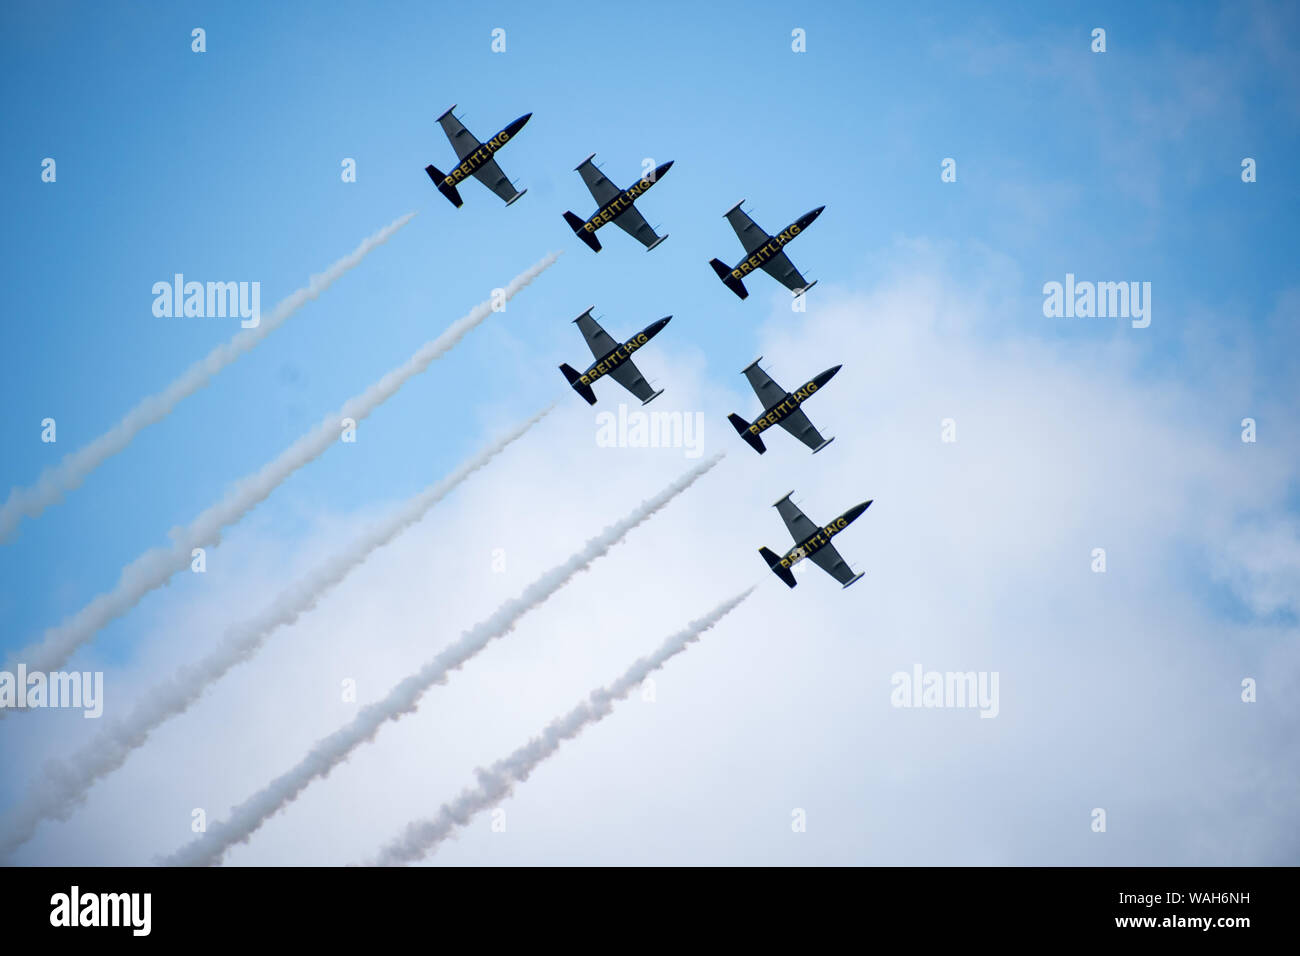 Breitling Jet Team formation flying aerobatic with smoke trails in air Stock Photo